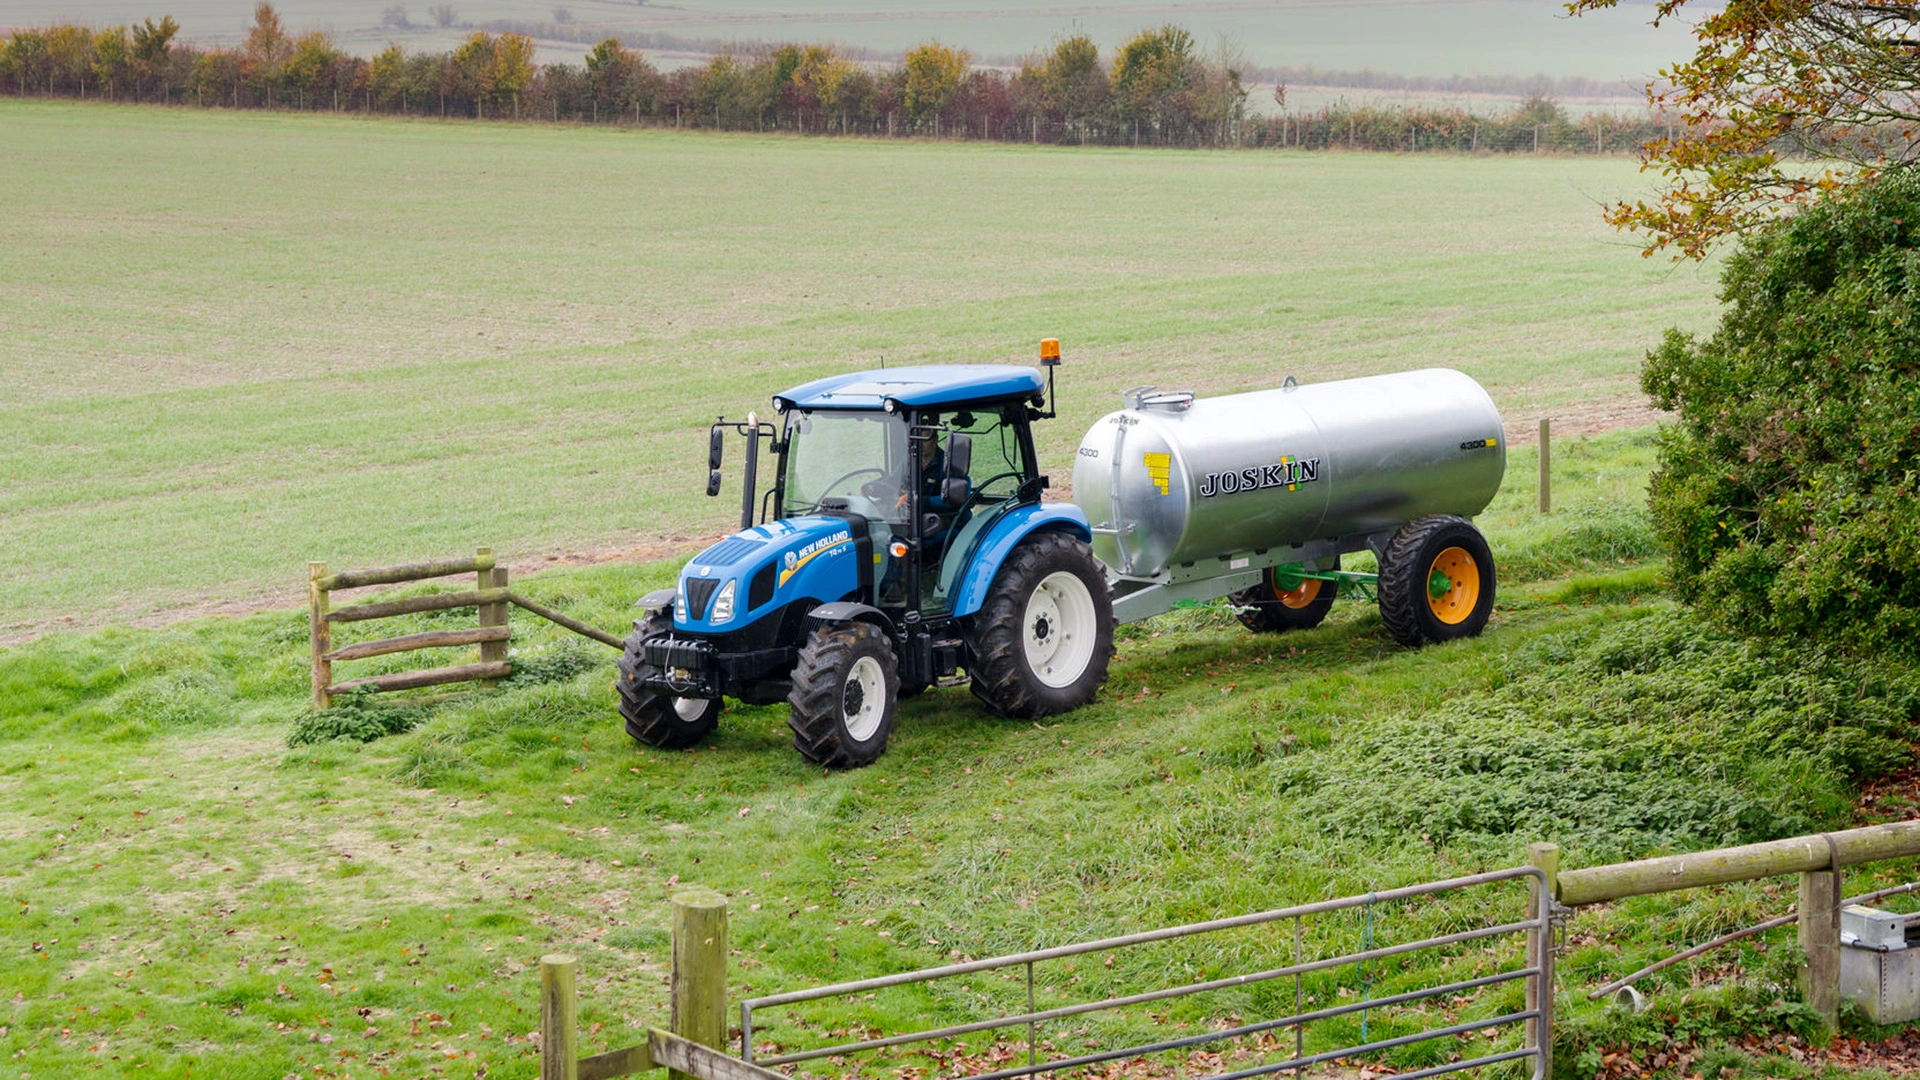 New Holland T4S tractor on duty transporting agricultural supplies